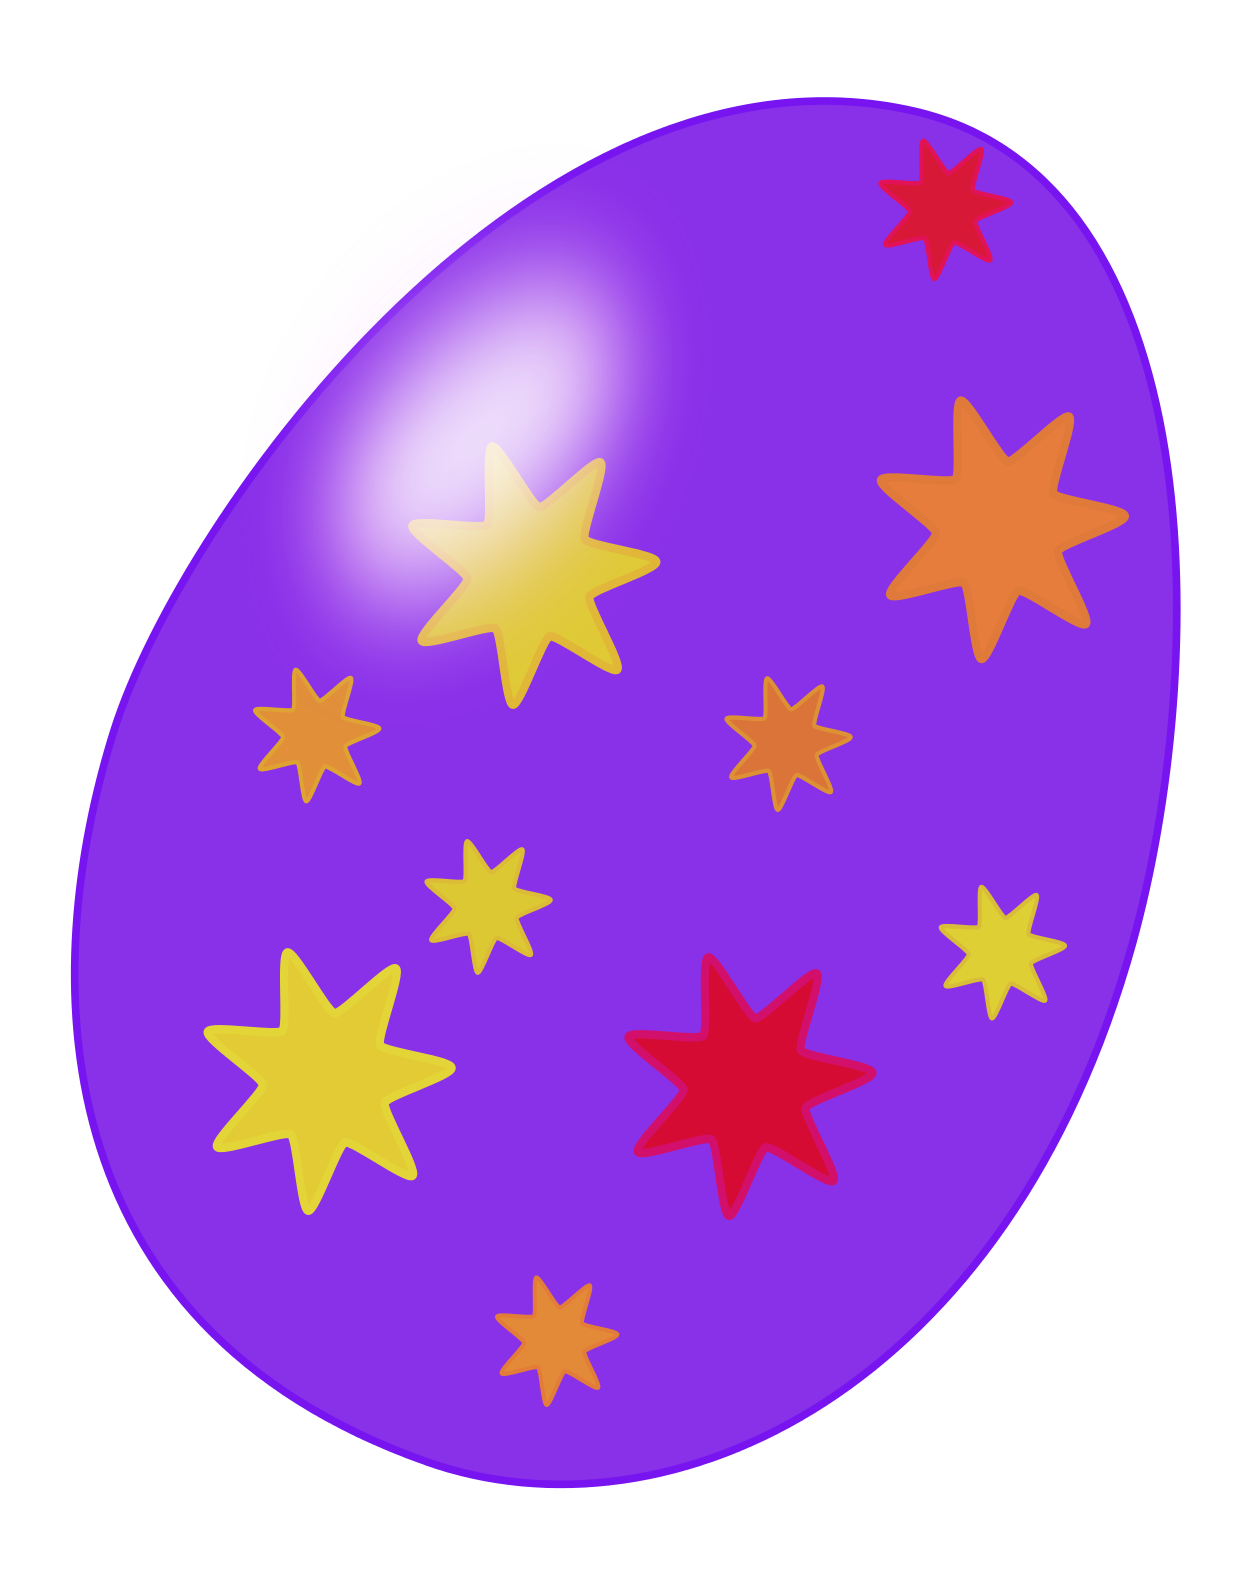 Easter Egg Images Free - ClipArt Best